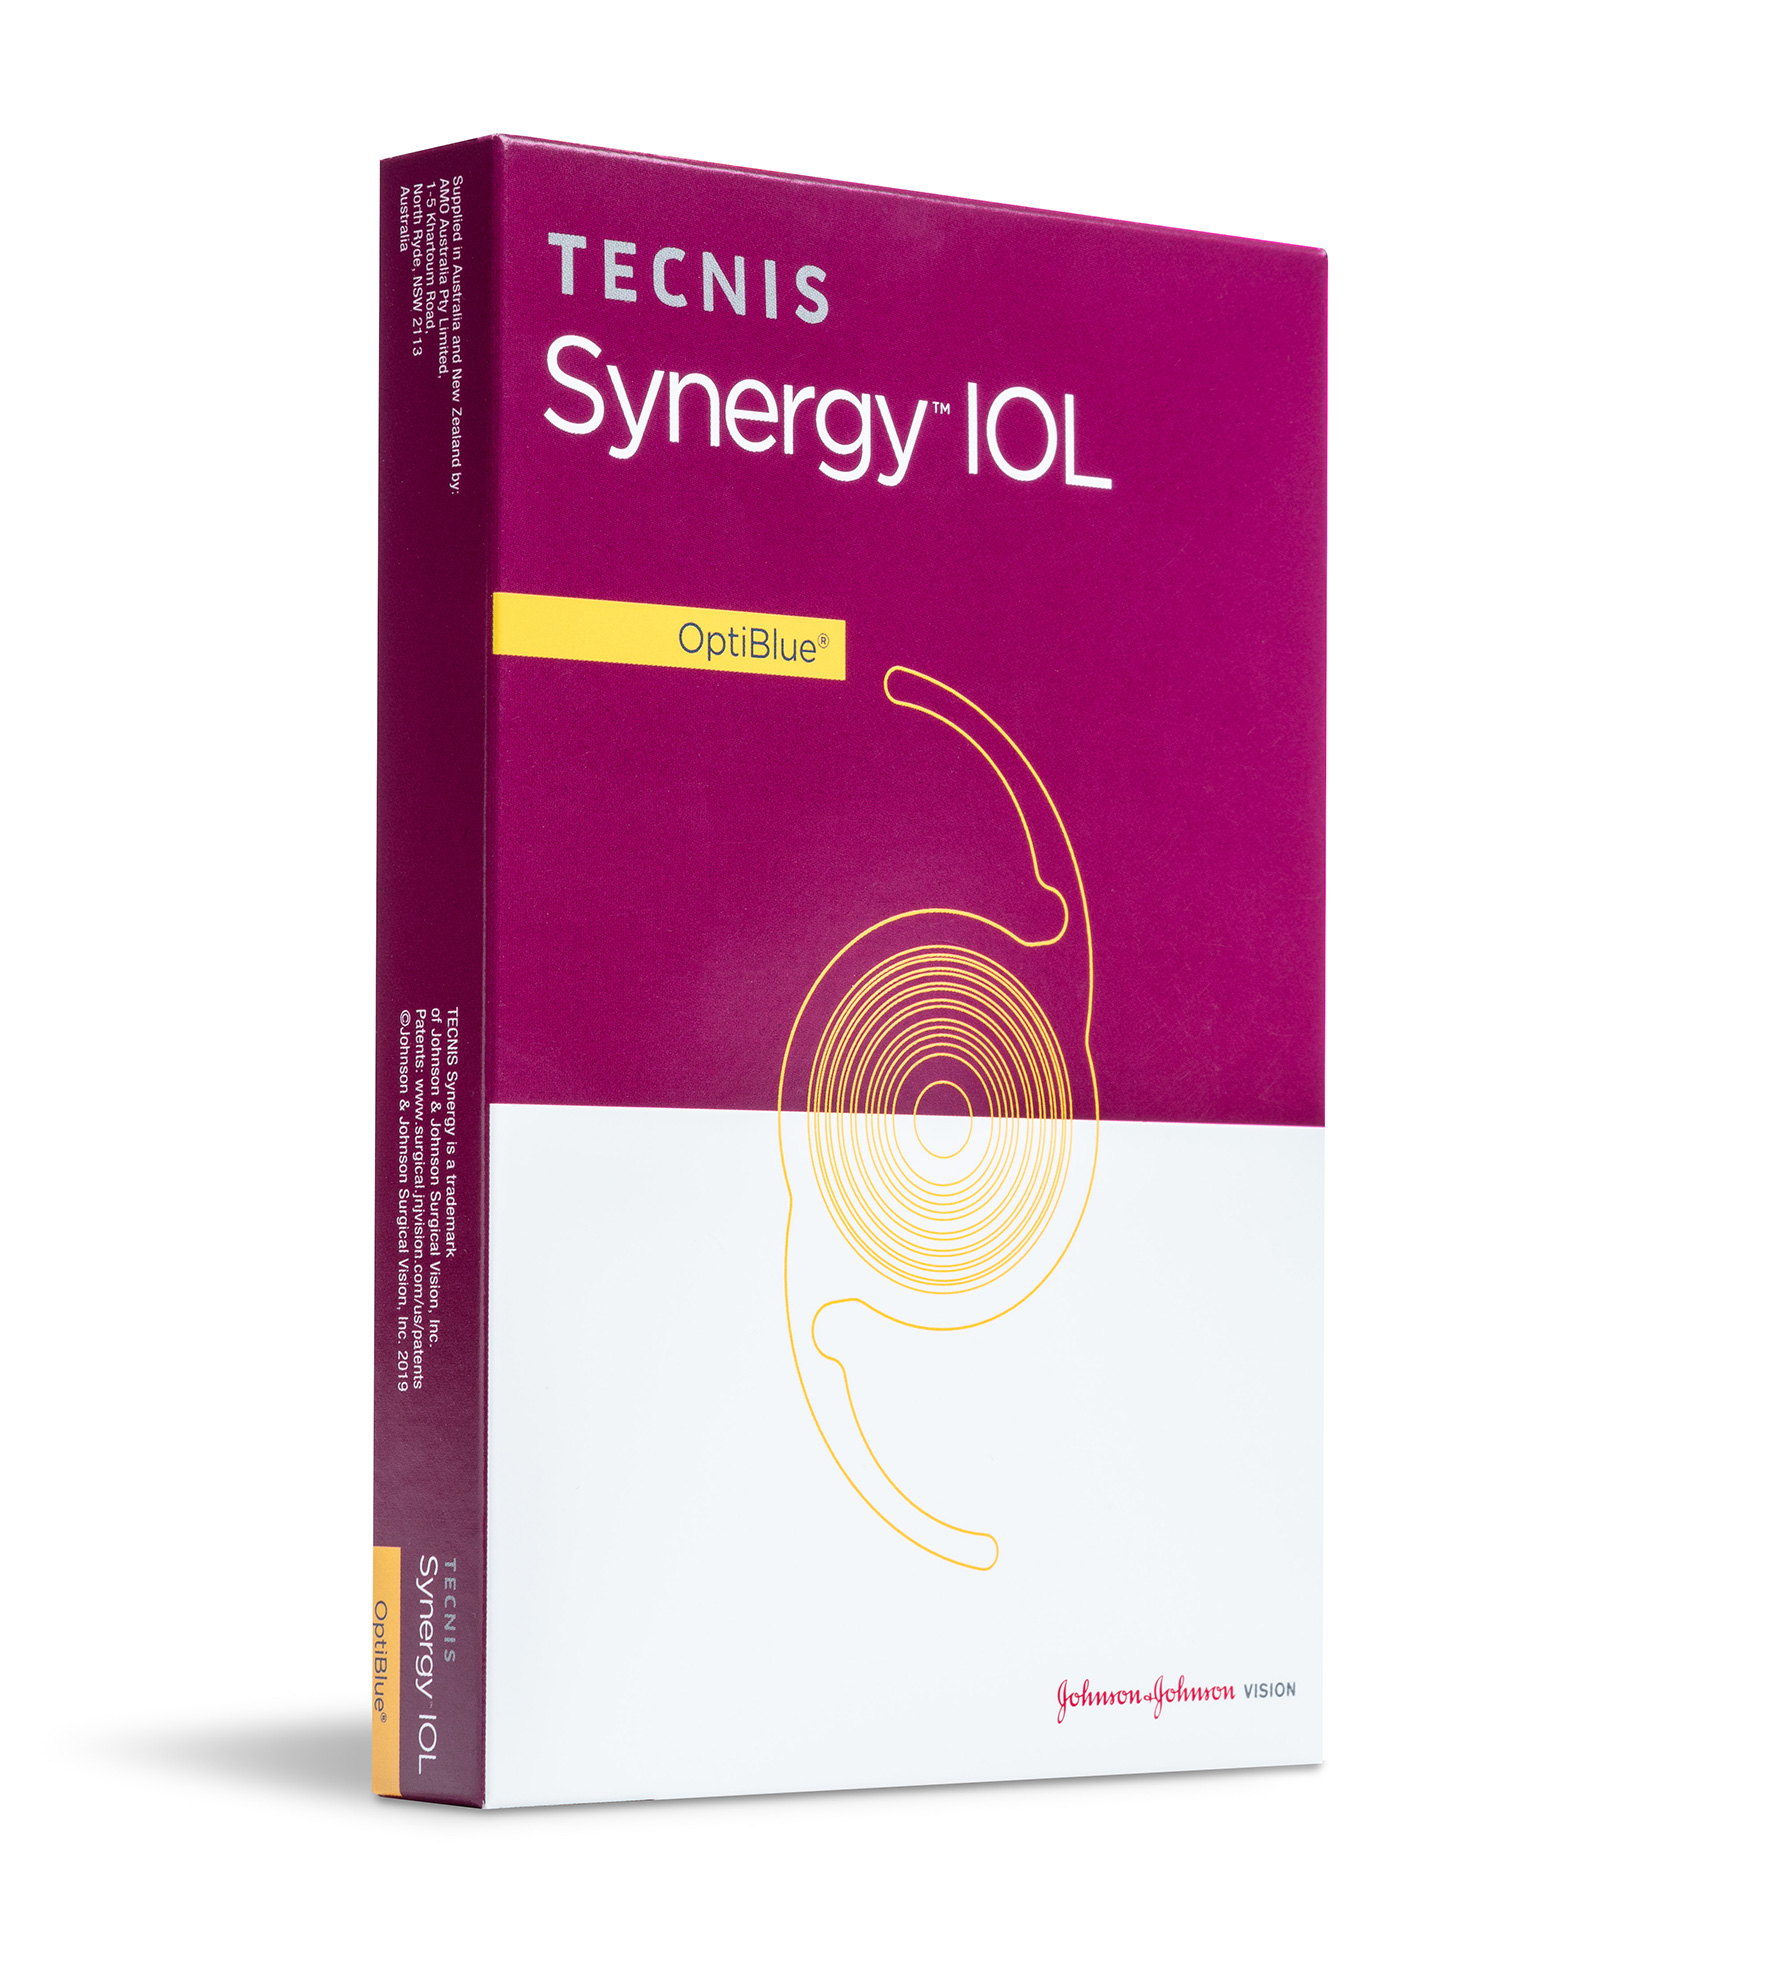 Synergy-IOL-Box-Front-Angled-small.jpg (584 KB)